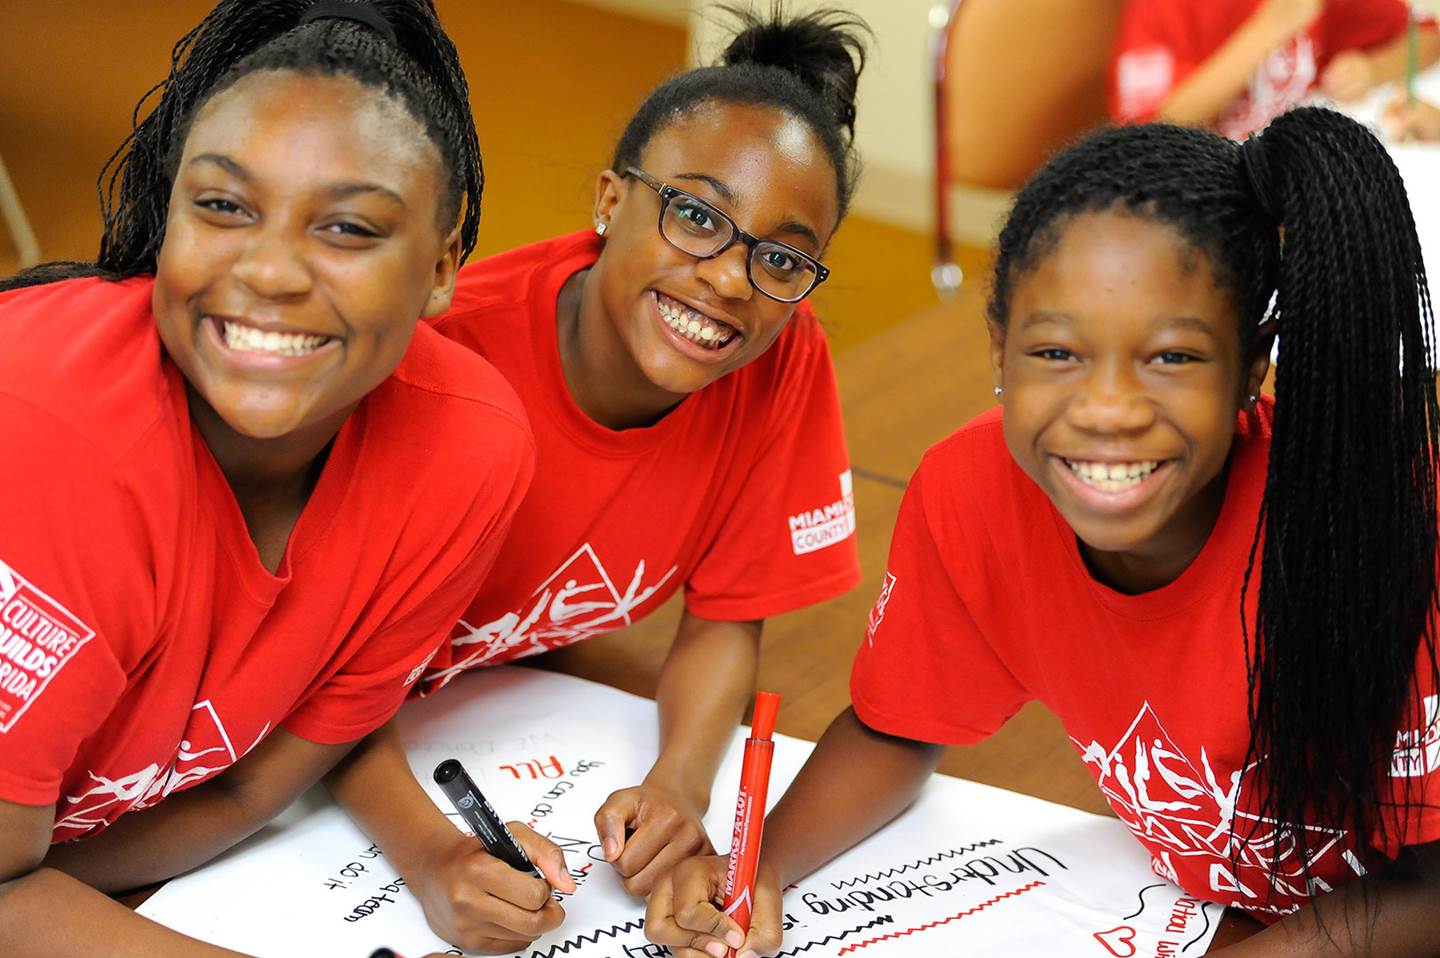 AileyCamp Miami students working on a poster and smiling.